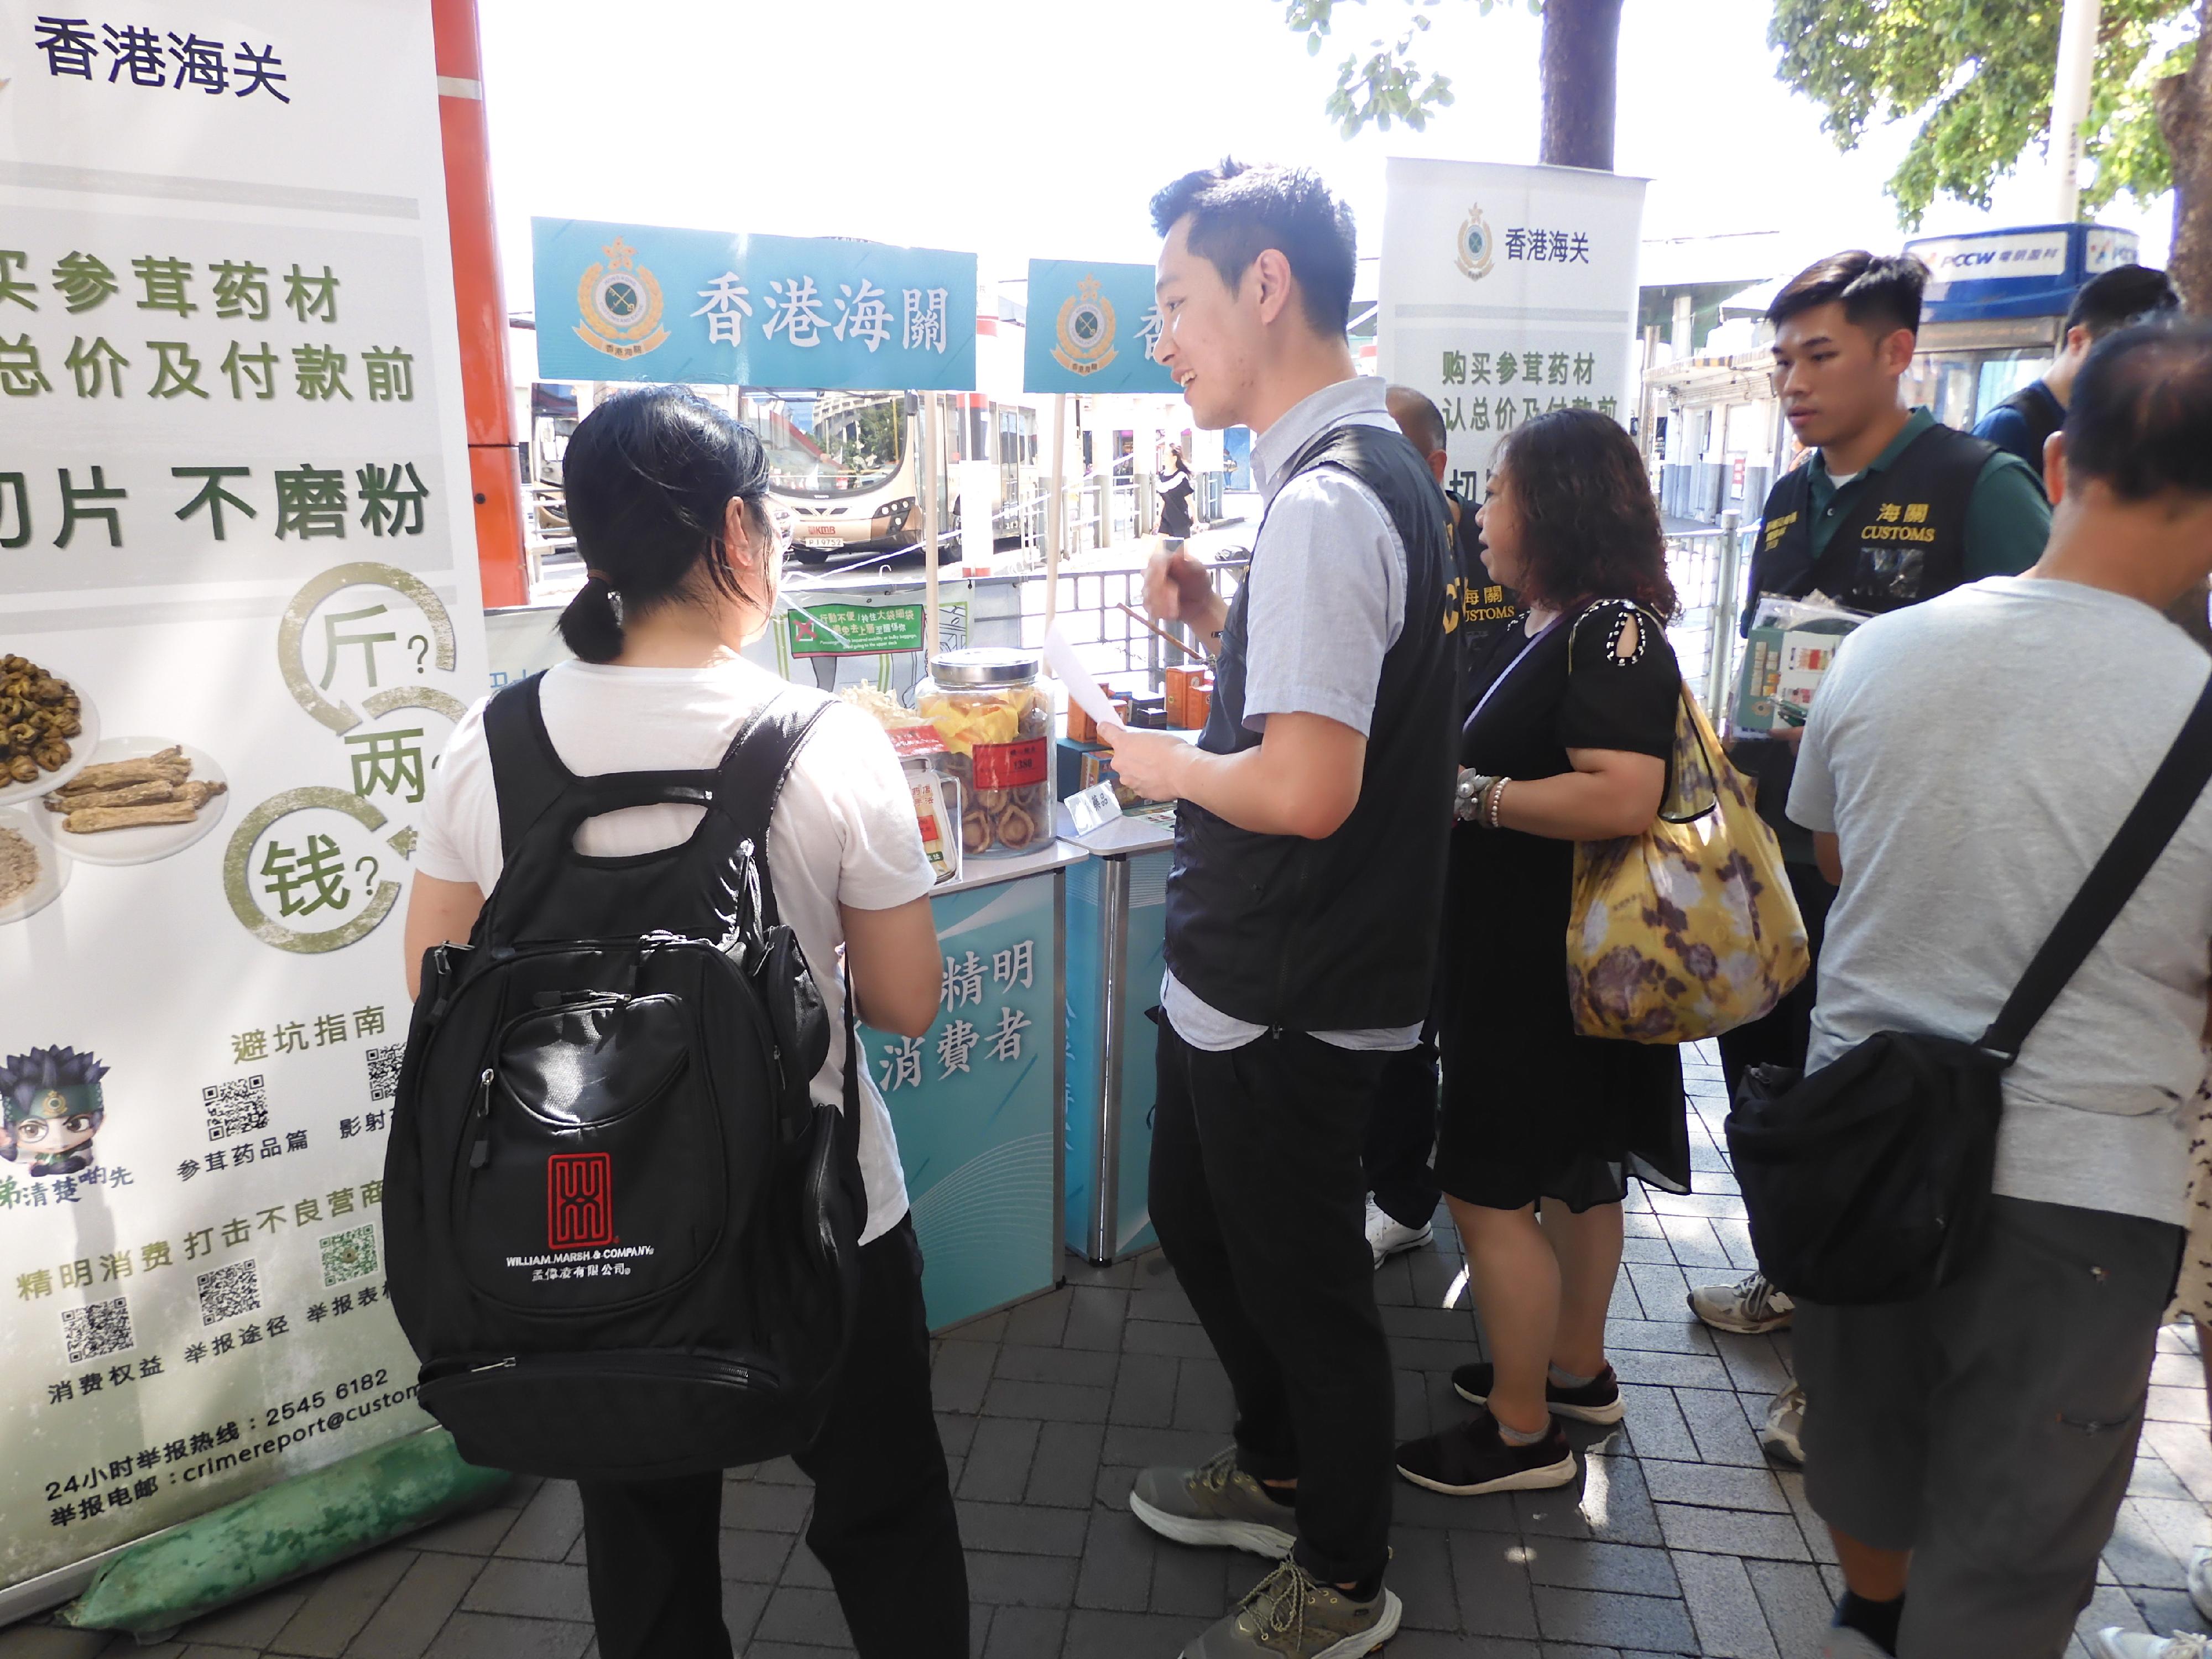 Hong Kong Customs launched an operation today (September 28) to step up patrols during the National Day Golden Week period at popular shopping spots in various districts and to remind traders to comply with the requirements of the Trade Descriptions Ordinance, with a view to safeguarding rights of local consumers and visitors. Photo shows Customs officers distributing pamphlets in Tsim Sha Tsui.
